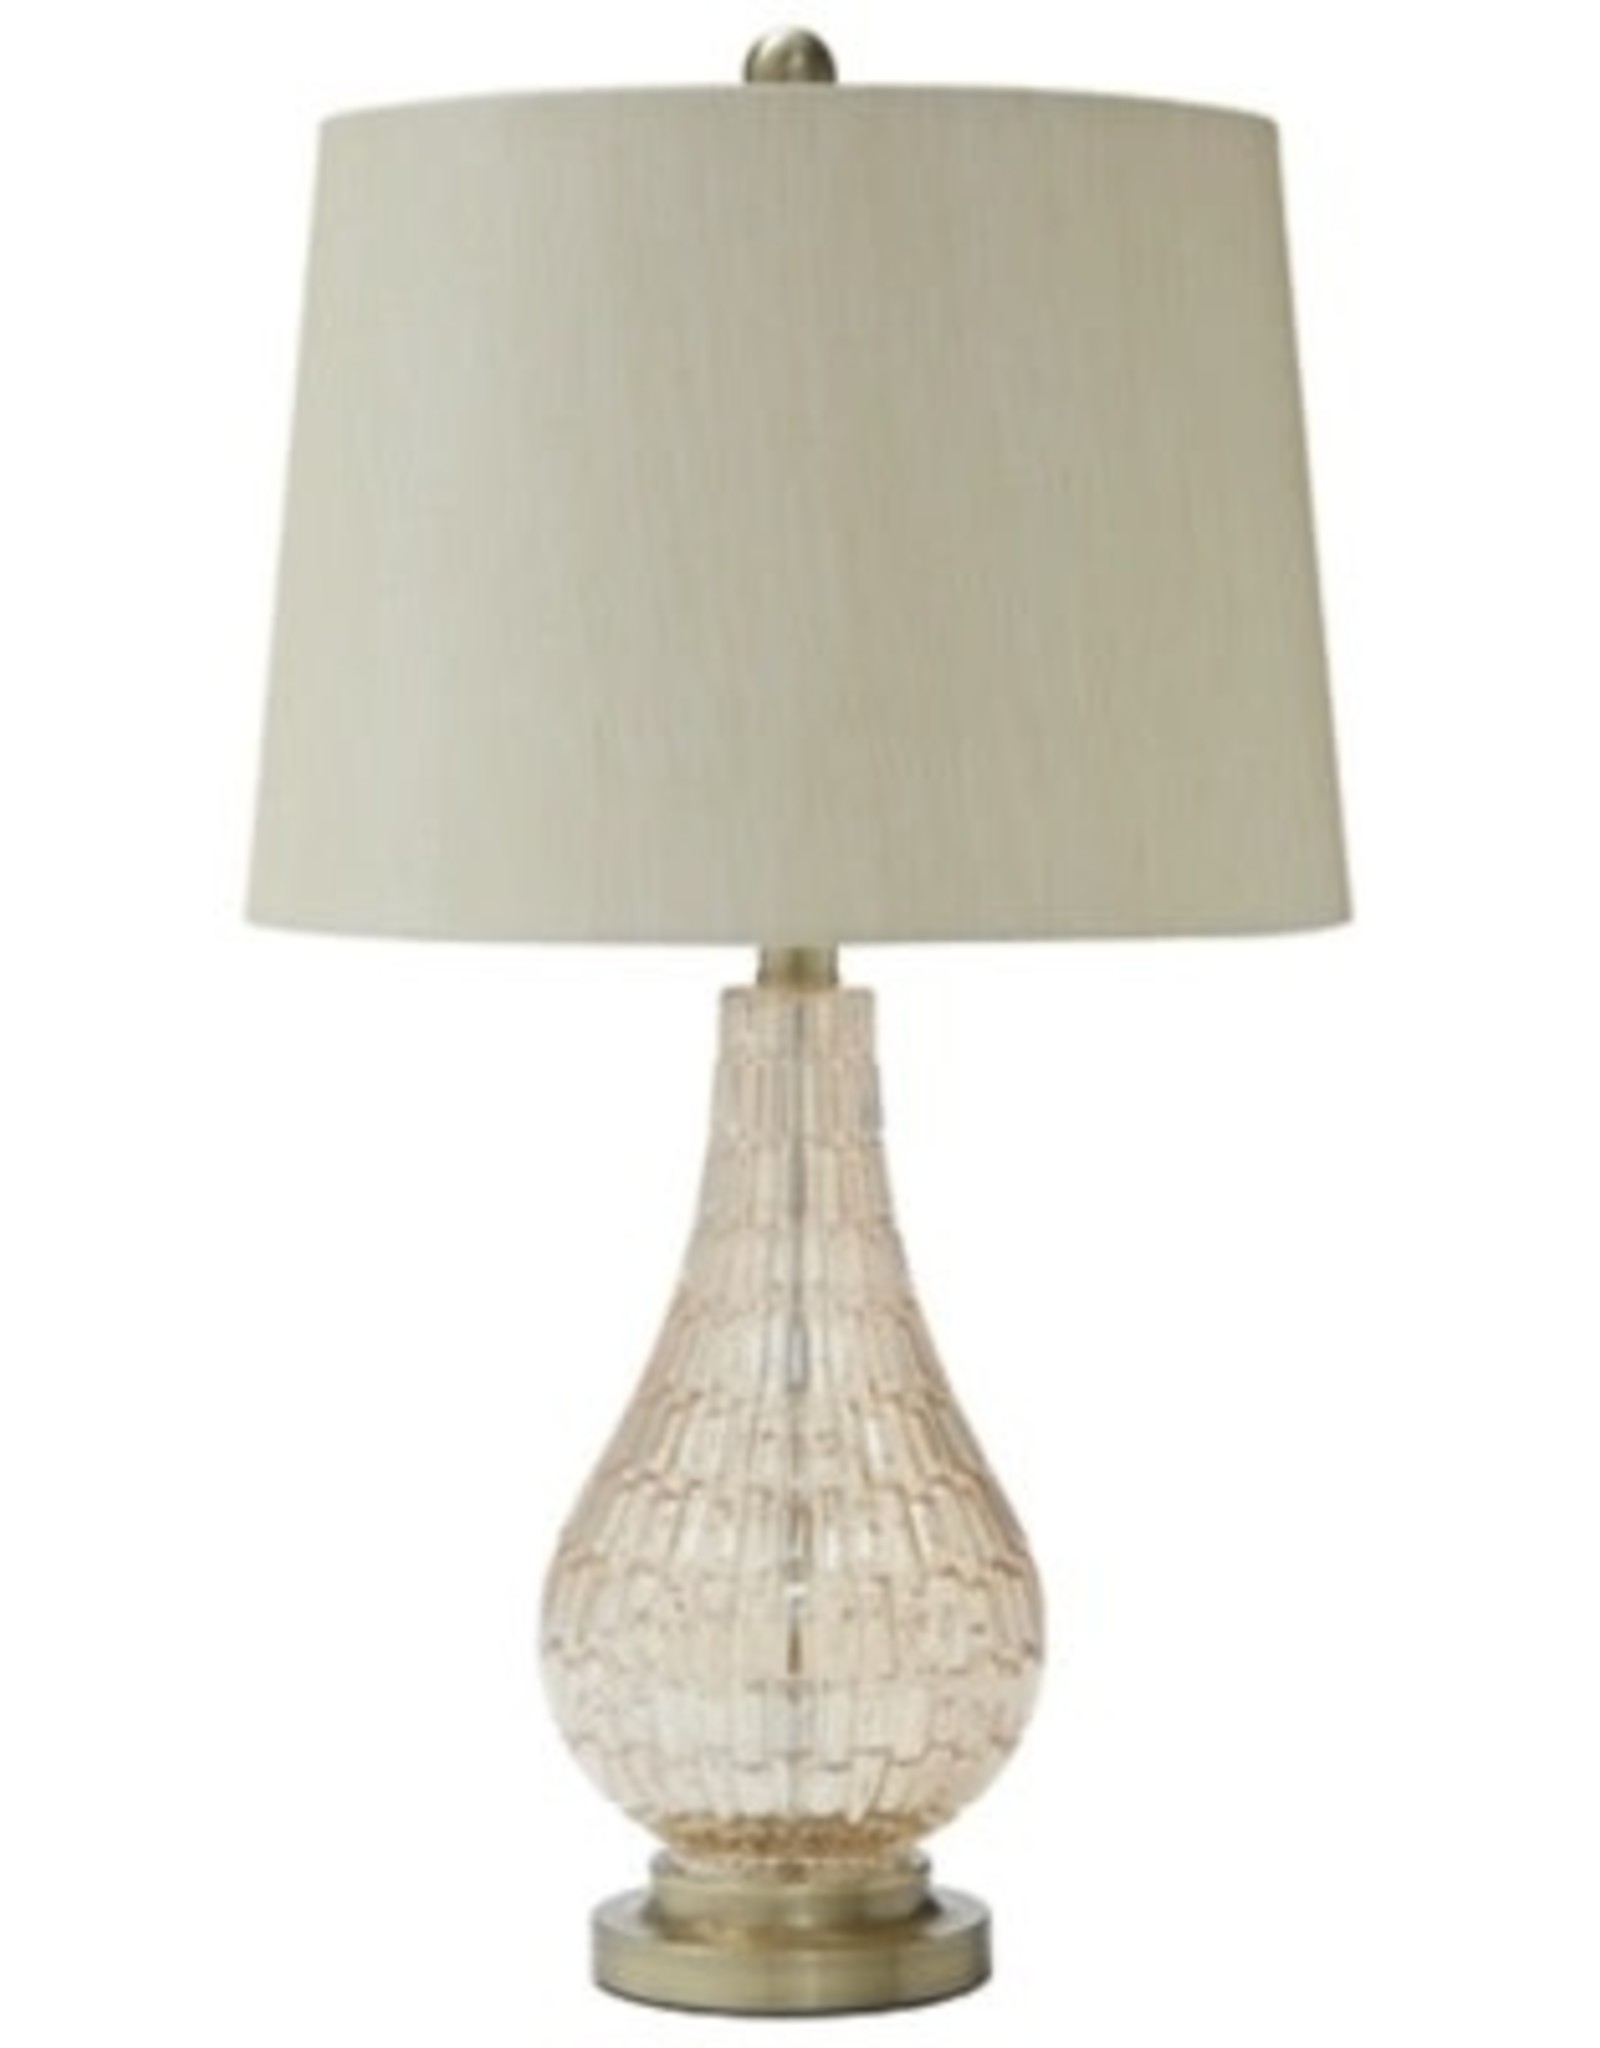 L430594 Glass Table Lamp